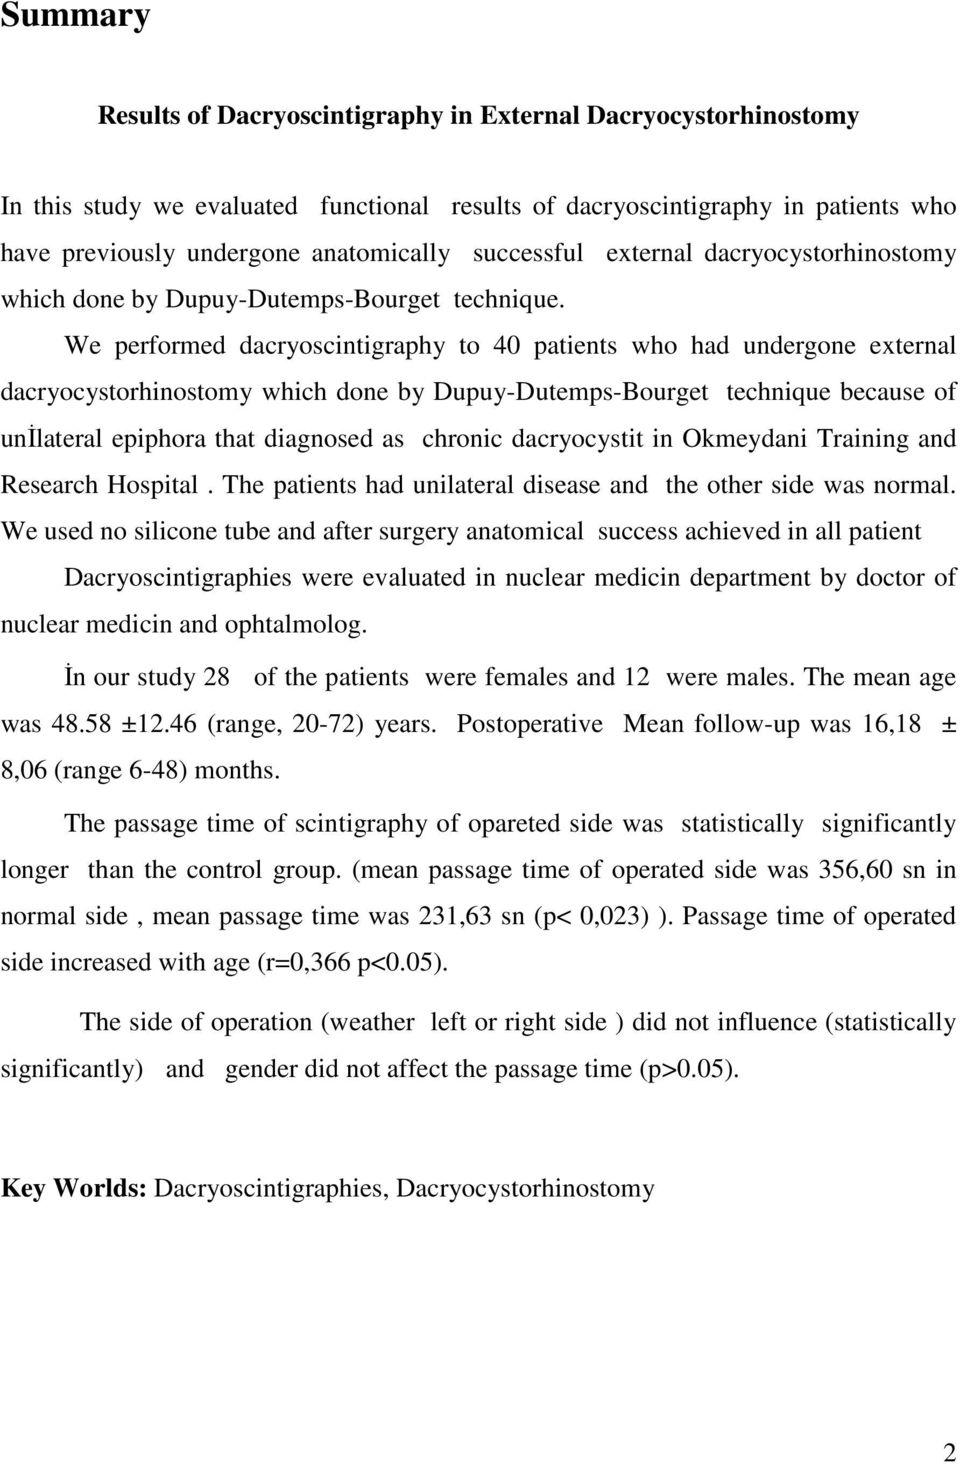 We performed dacryoscintigraphy to 40 patients who had undergone external dacryocystorhinostomy which done by Dupuy-Dutemps-Bourget technique because of unilateral epiphora that diagnosed as chronic